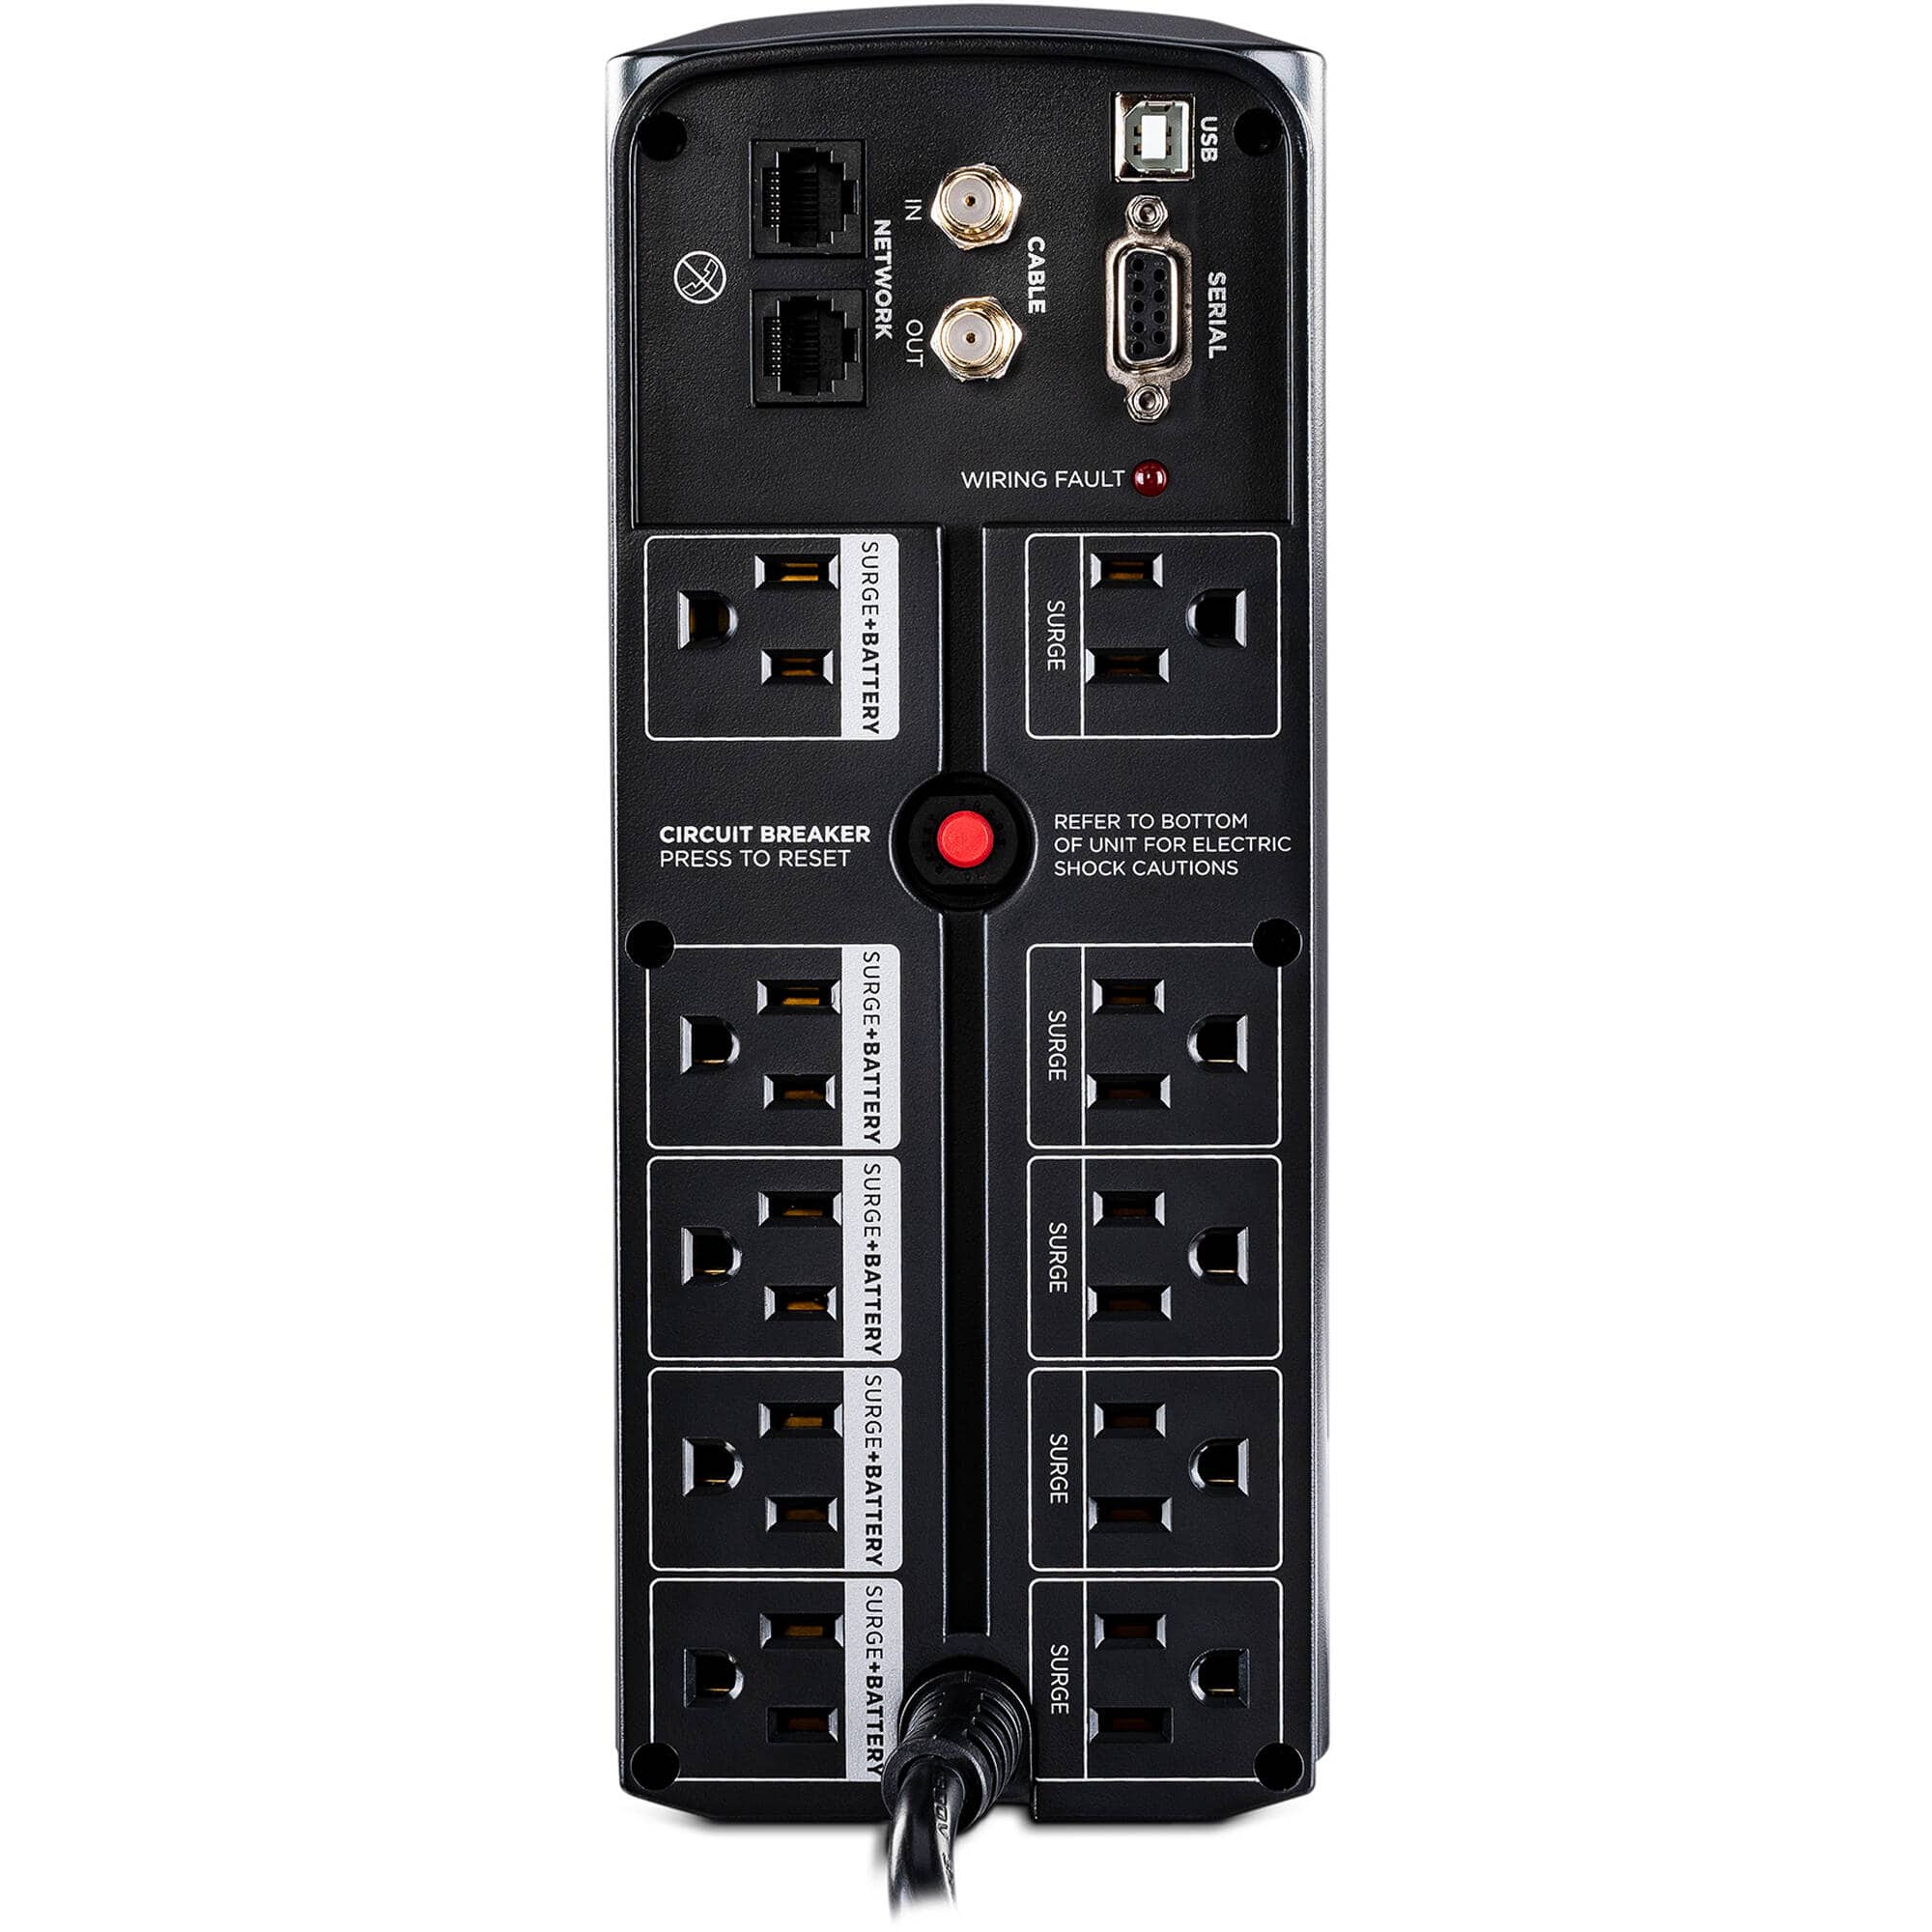 CyberPower CP1200AVR-R AVR 1200VA/720W 8 Outlets, USB Mini-Tower UPS - New Battery Certified Refurbished